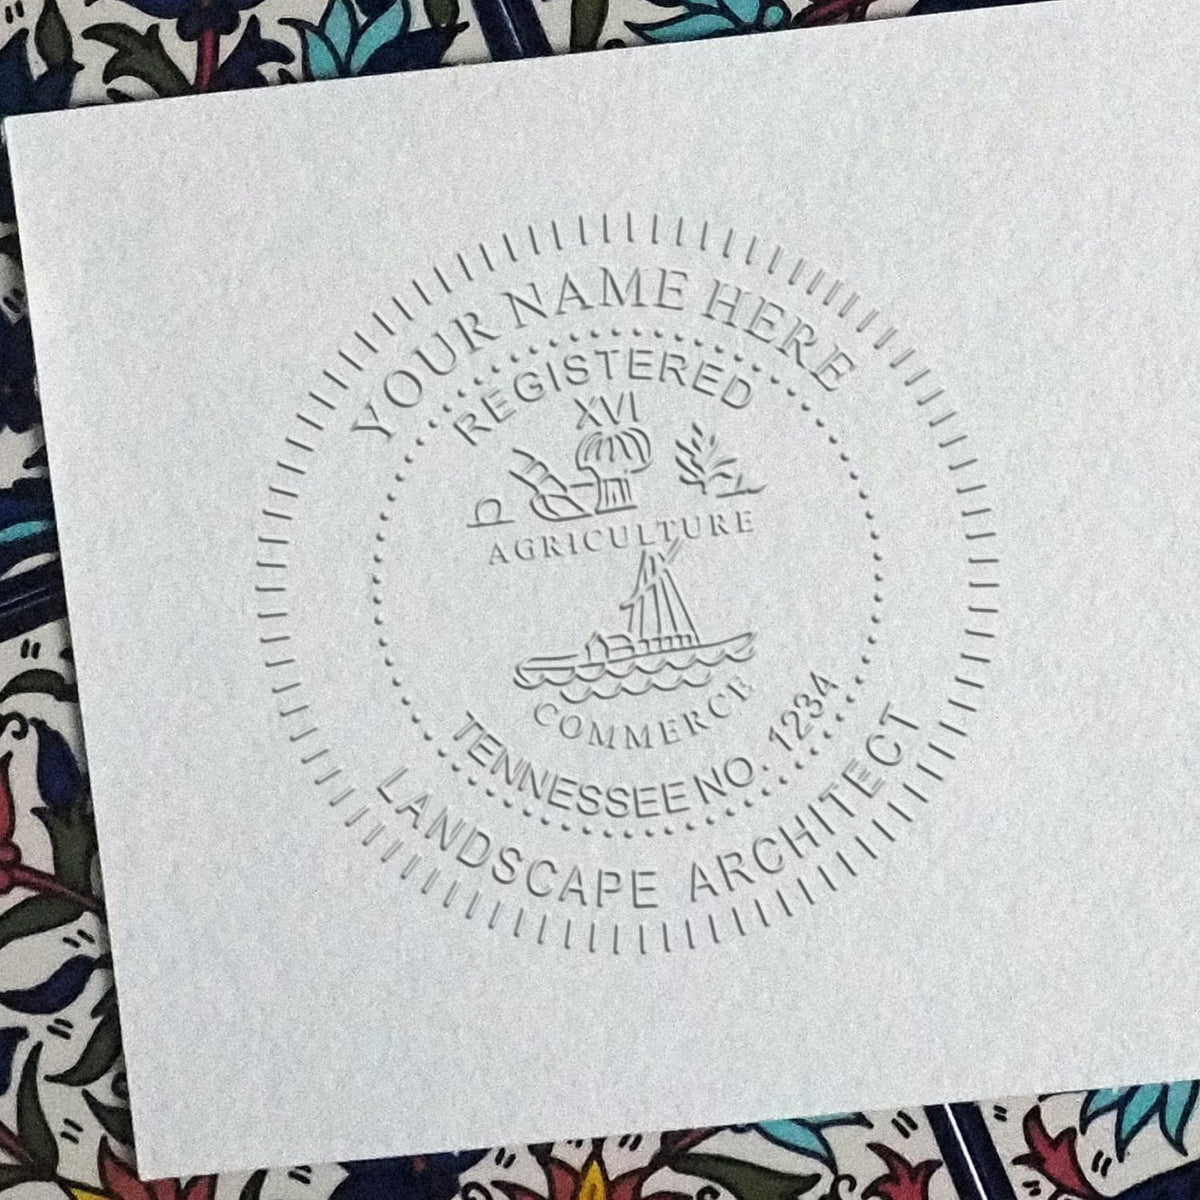 The Gift Tennessee Landscape Architect Seal stamp impression comes to life with a crisp, detailed image stamped on paper - showcasing true professional quality.